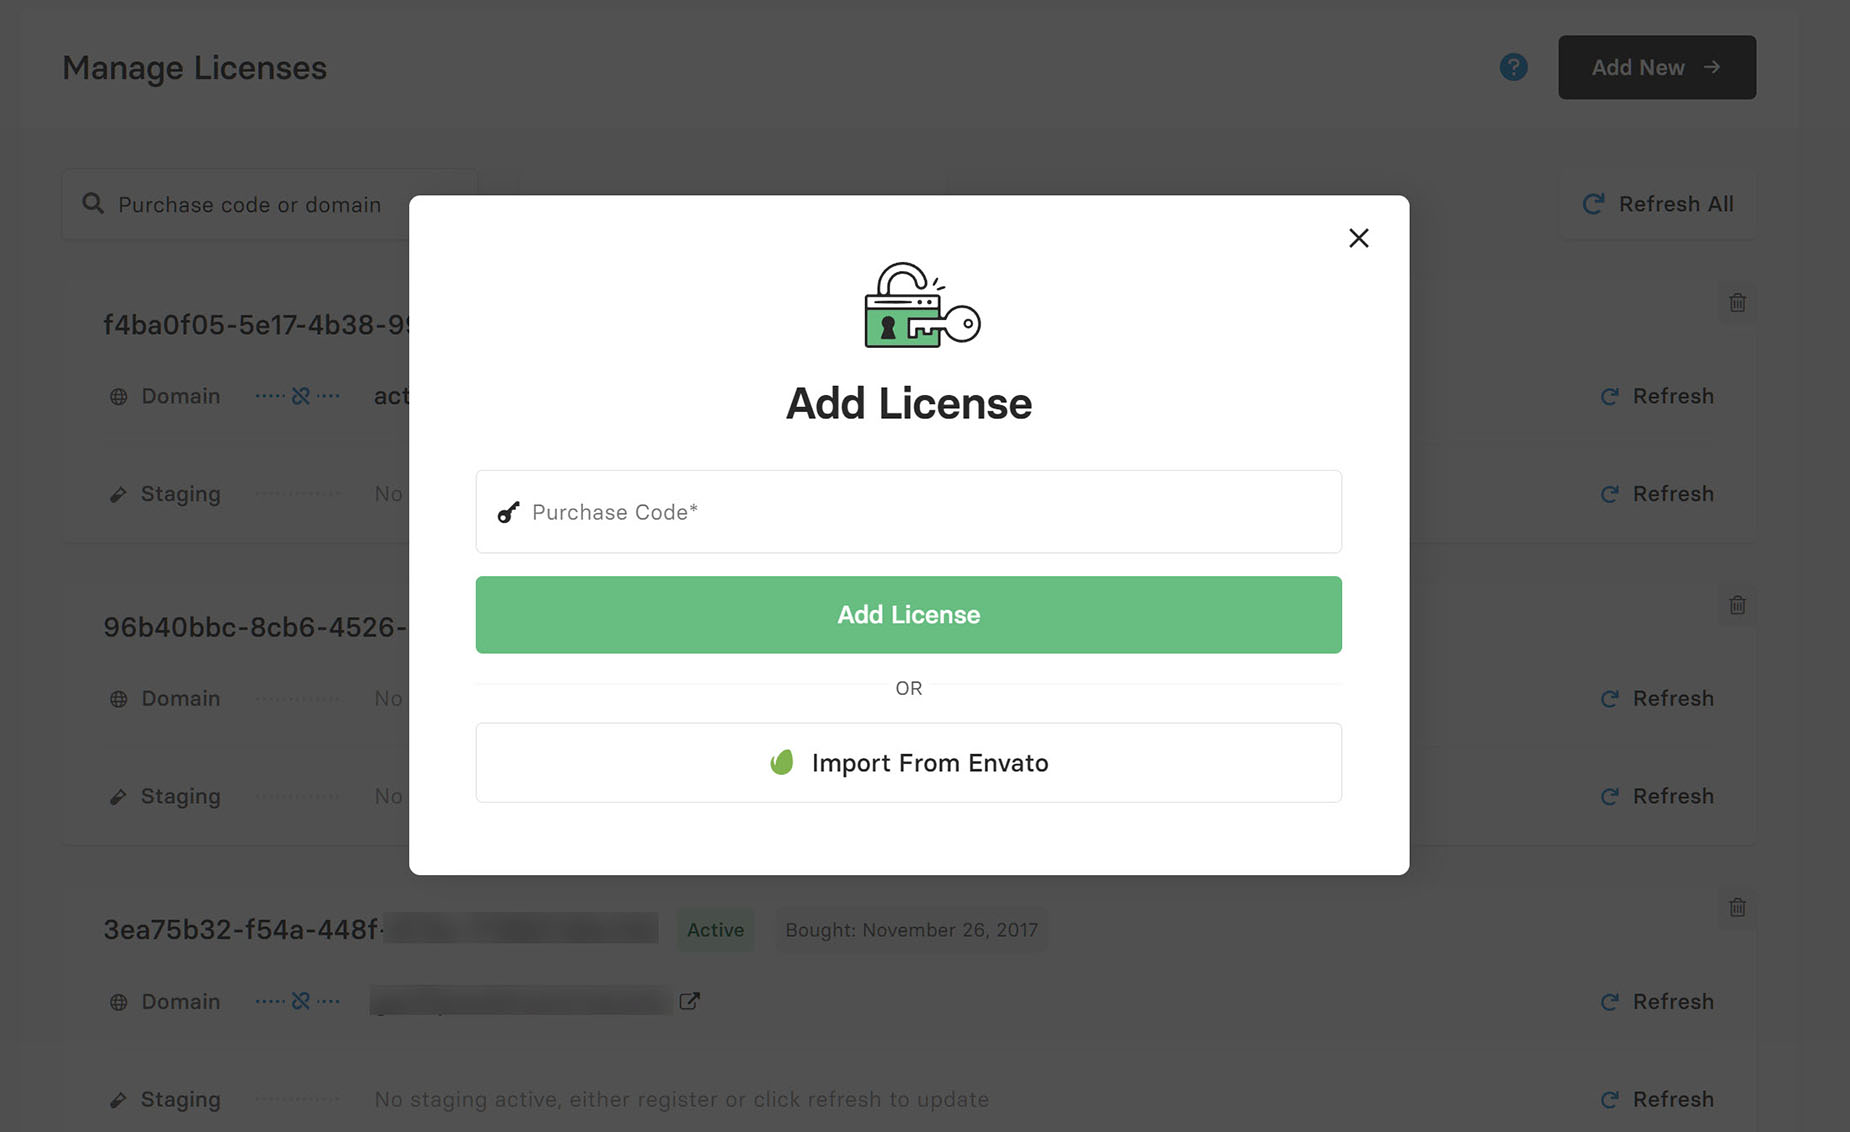 My Avada > Manage Licenses > Add New License